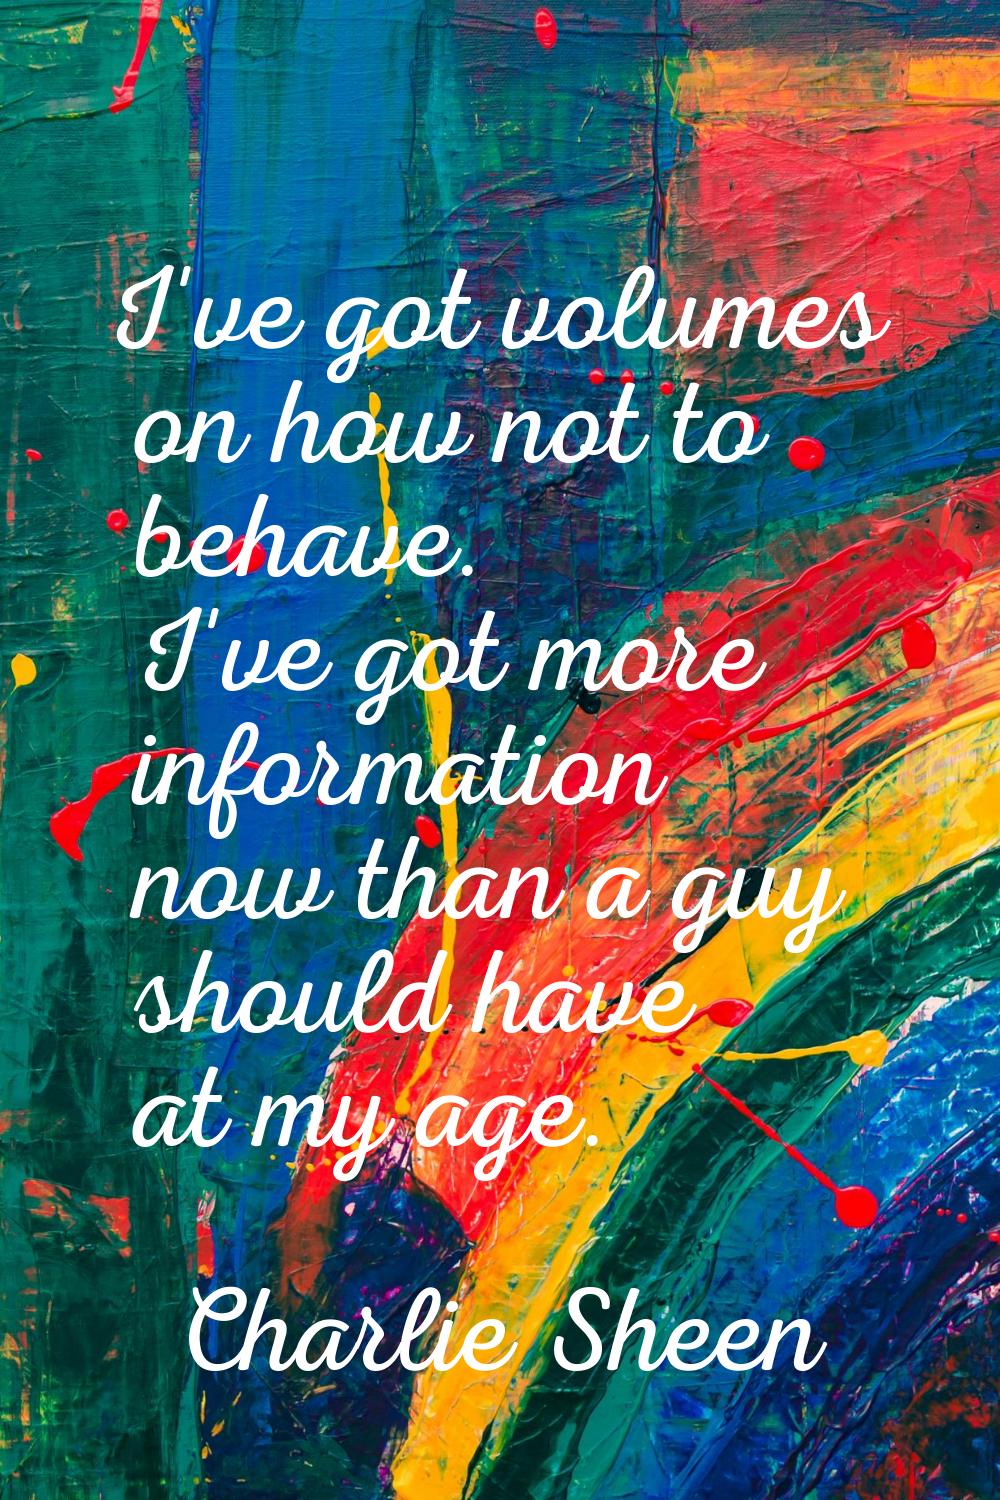 I've got volumes on how not to behave. I've got more information now than a guy should have at my a